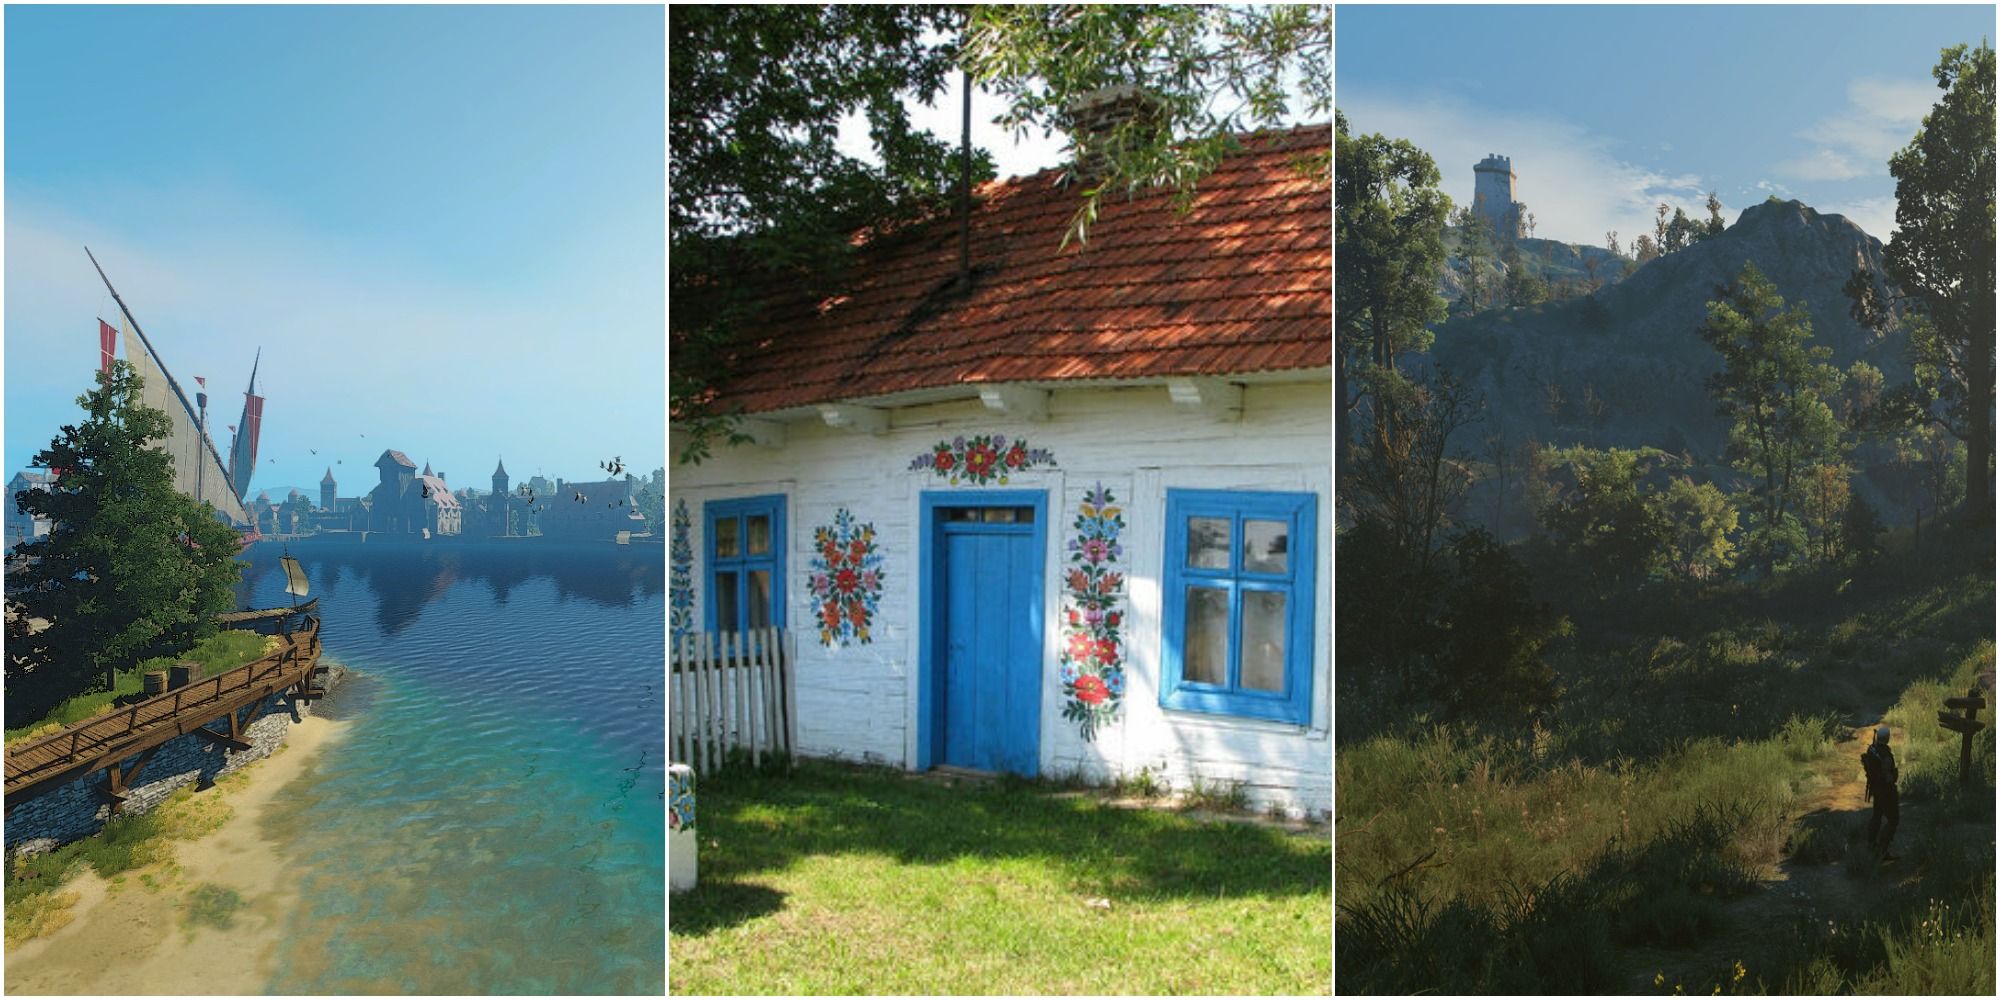 Harbor of Novigrad, a painted house in Zalipie and Veln crossroads, left to right